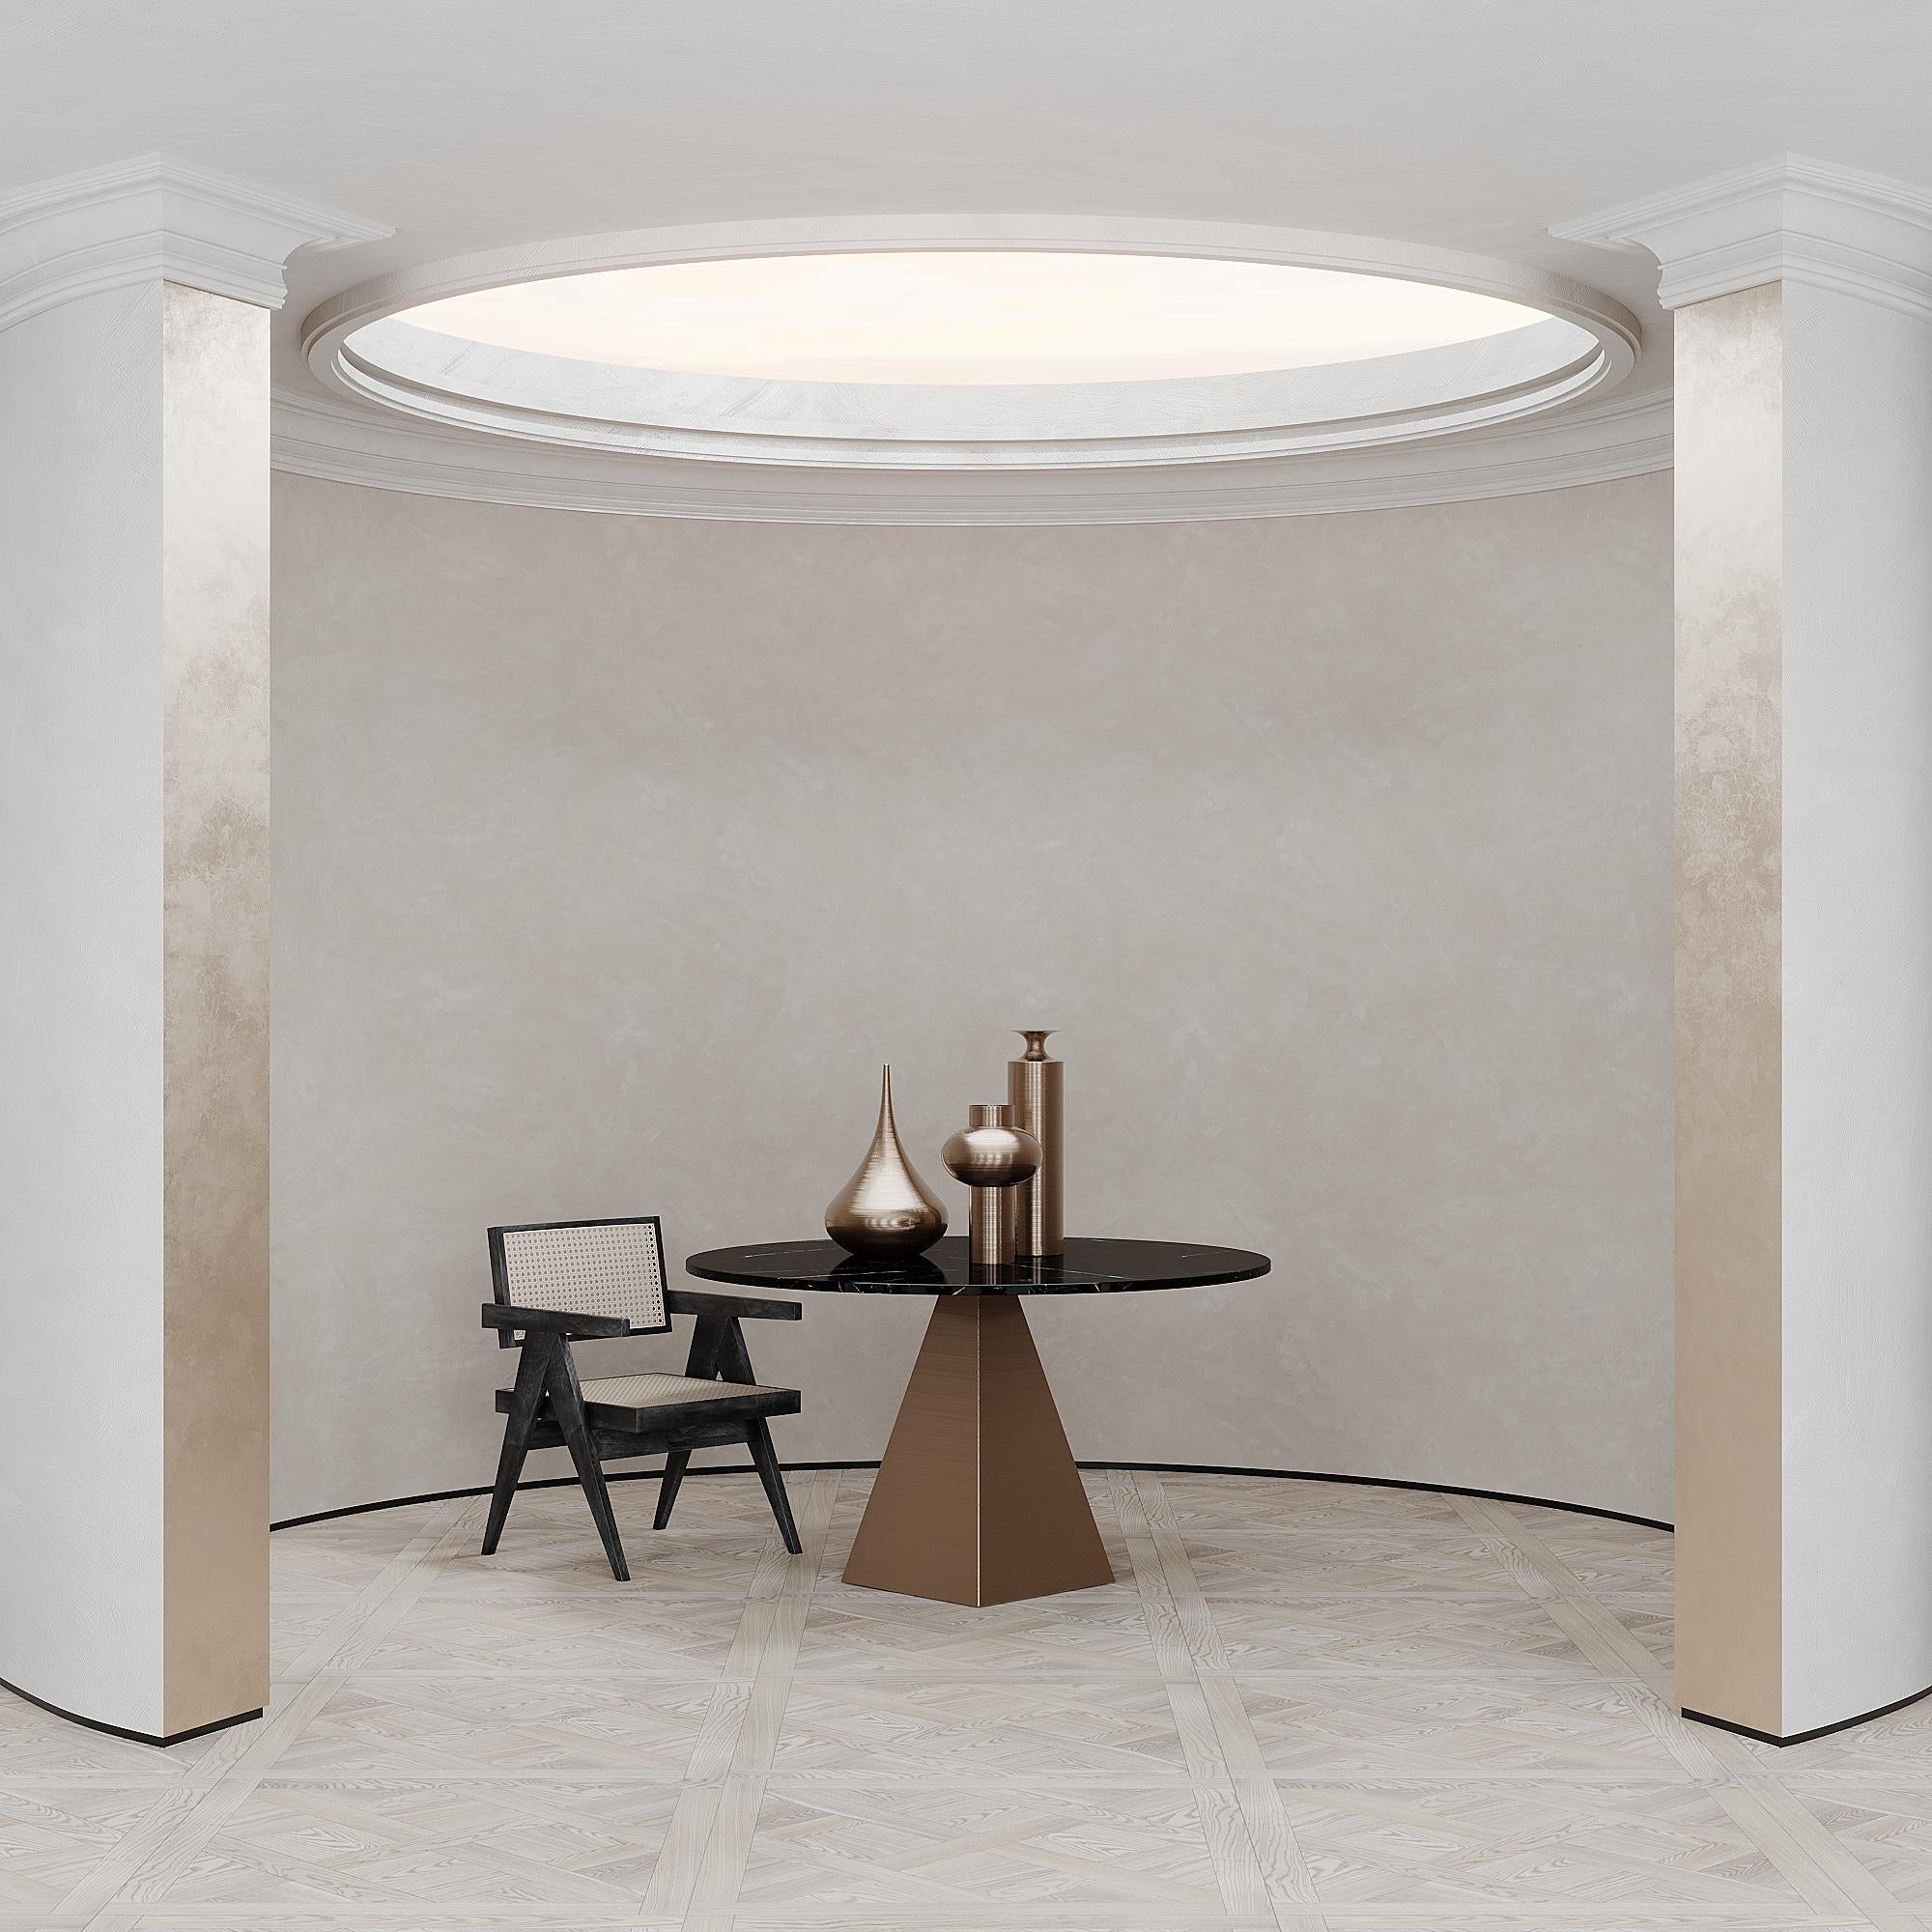 Italian Solaris Round Dining Table of Marble and Copper, Made in Italy For Sale